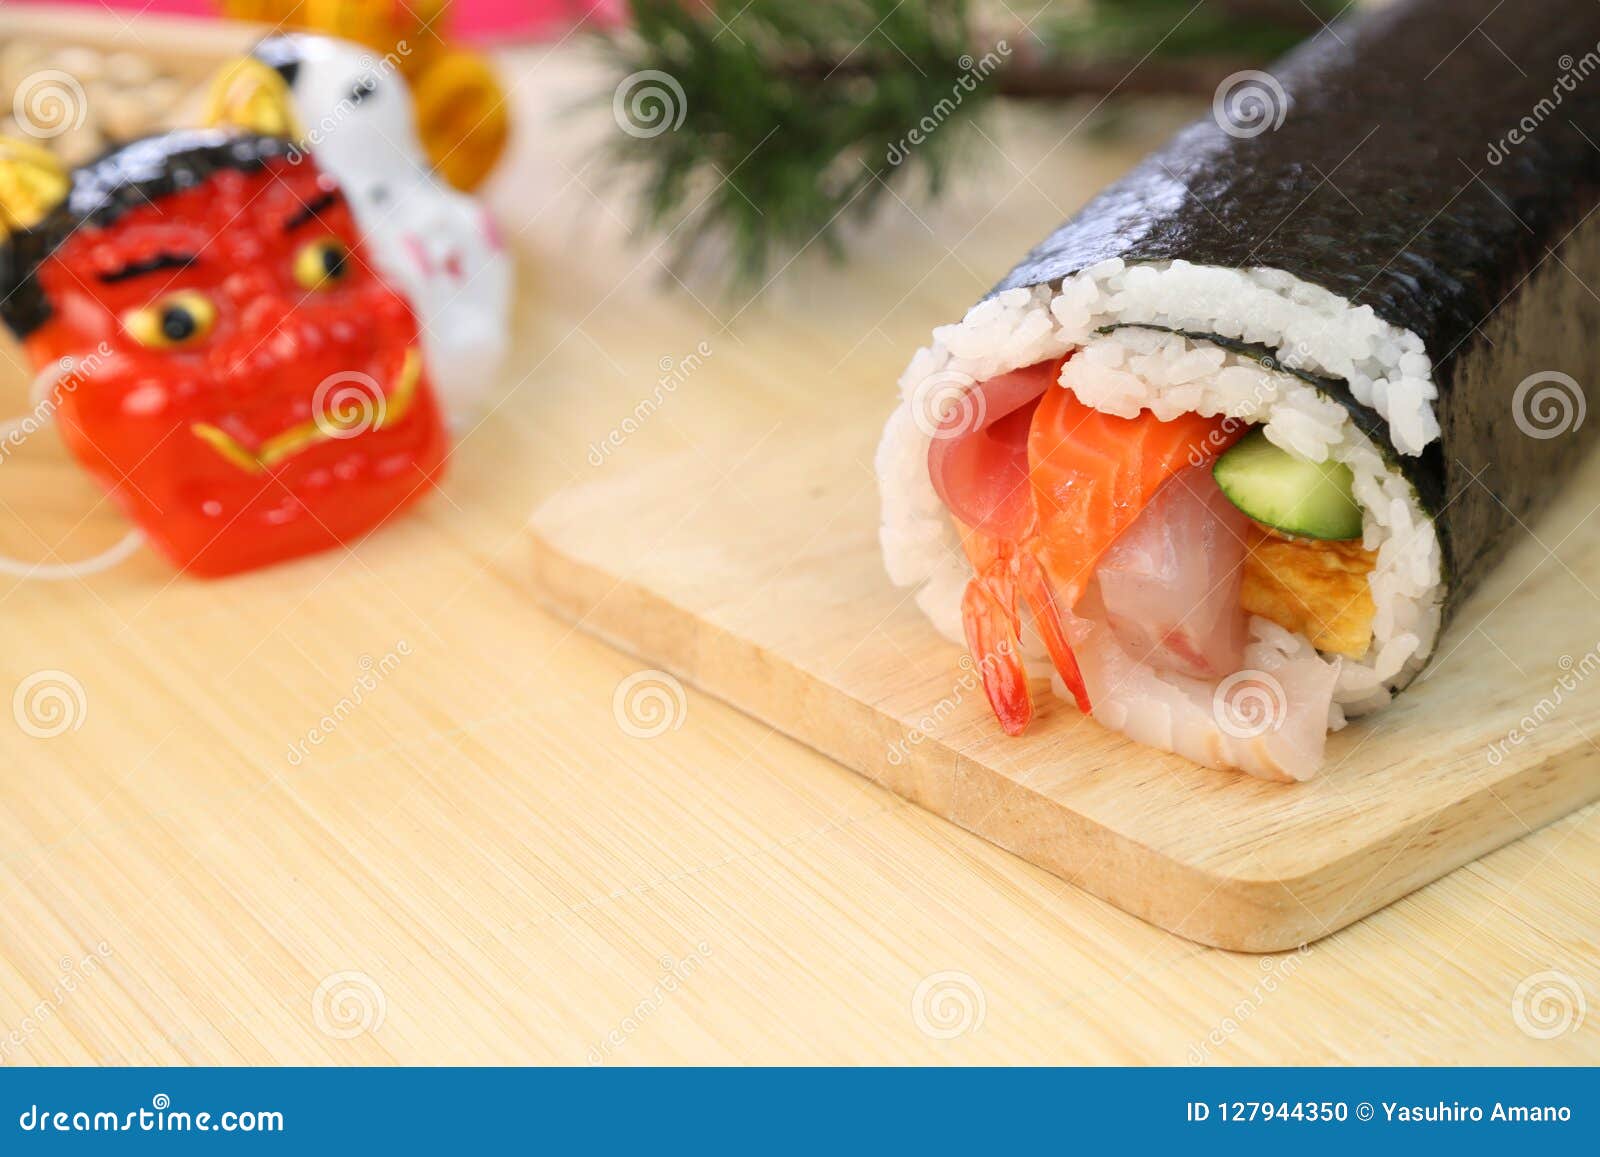 https://thumbs.dreamstime.com/z/ehomaki-literally-sushi-roll-blessing-direction-refers-to-maki-zushi-eating-which-day-setsubun-traditional-end-winter-127944350.jpg